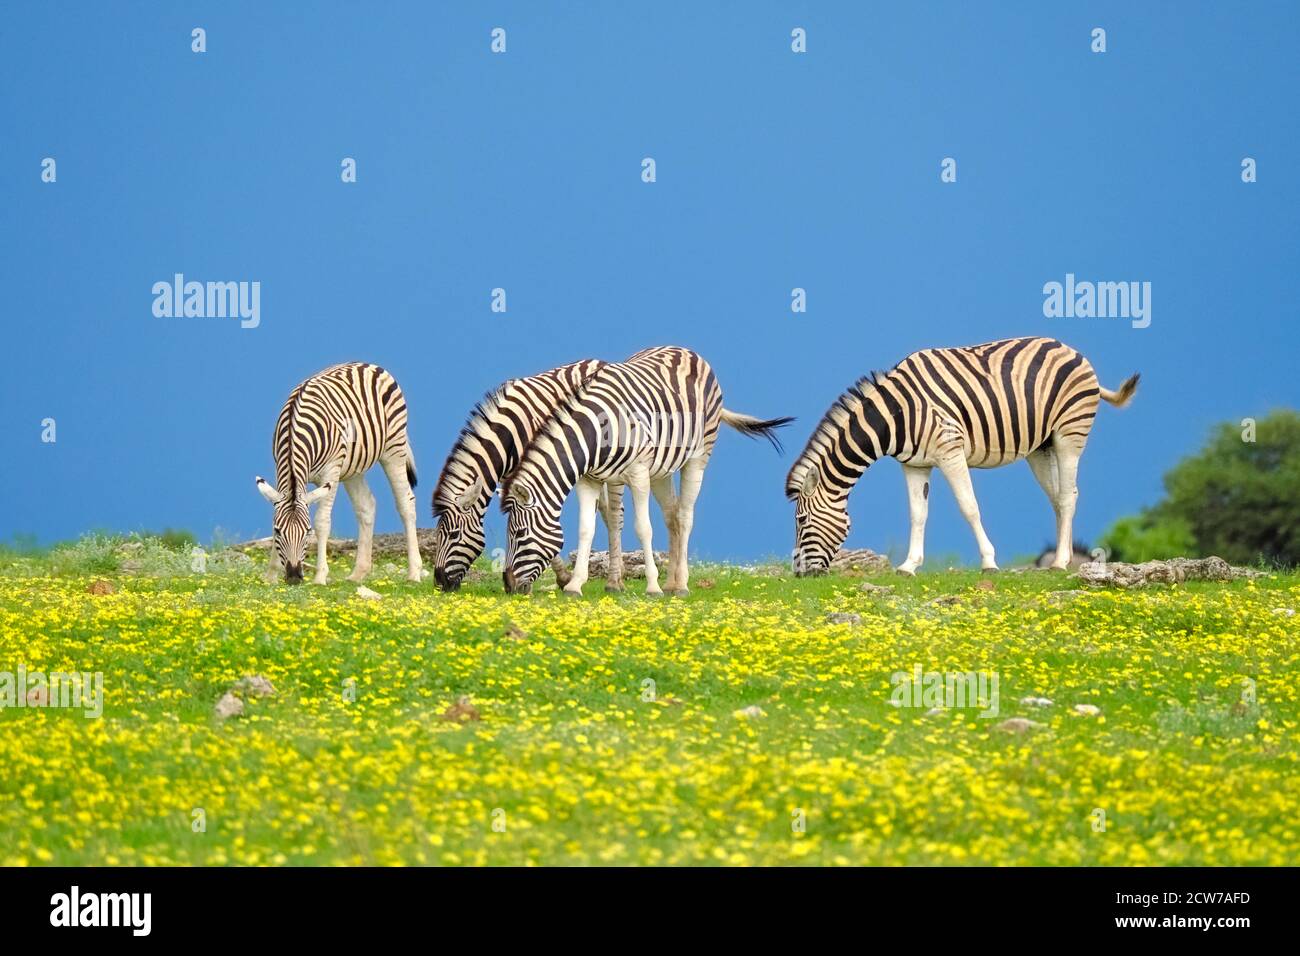 Burchell's Zebra herd, Equus quagga burchellii, is grazing in a yellow flower field. Colorful African scenery in Etosha National Park, Namibia, Africa. Stock Photo